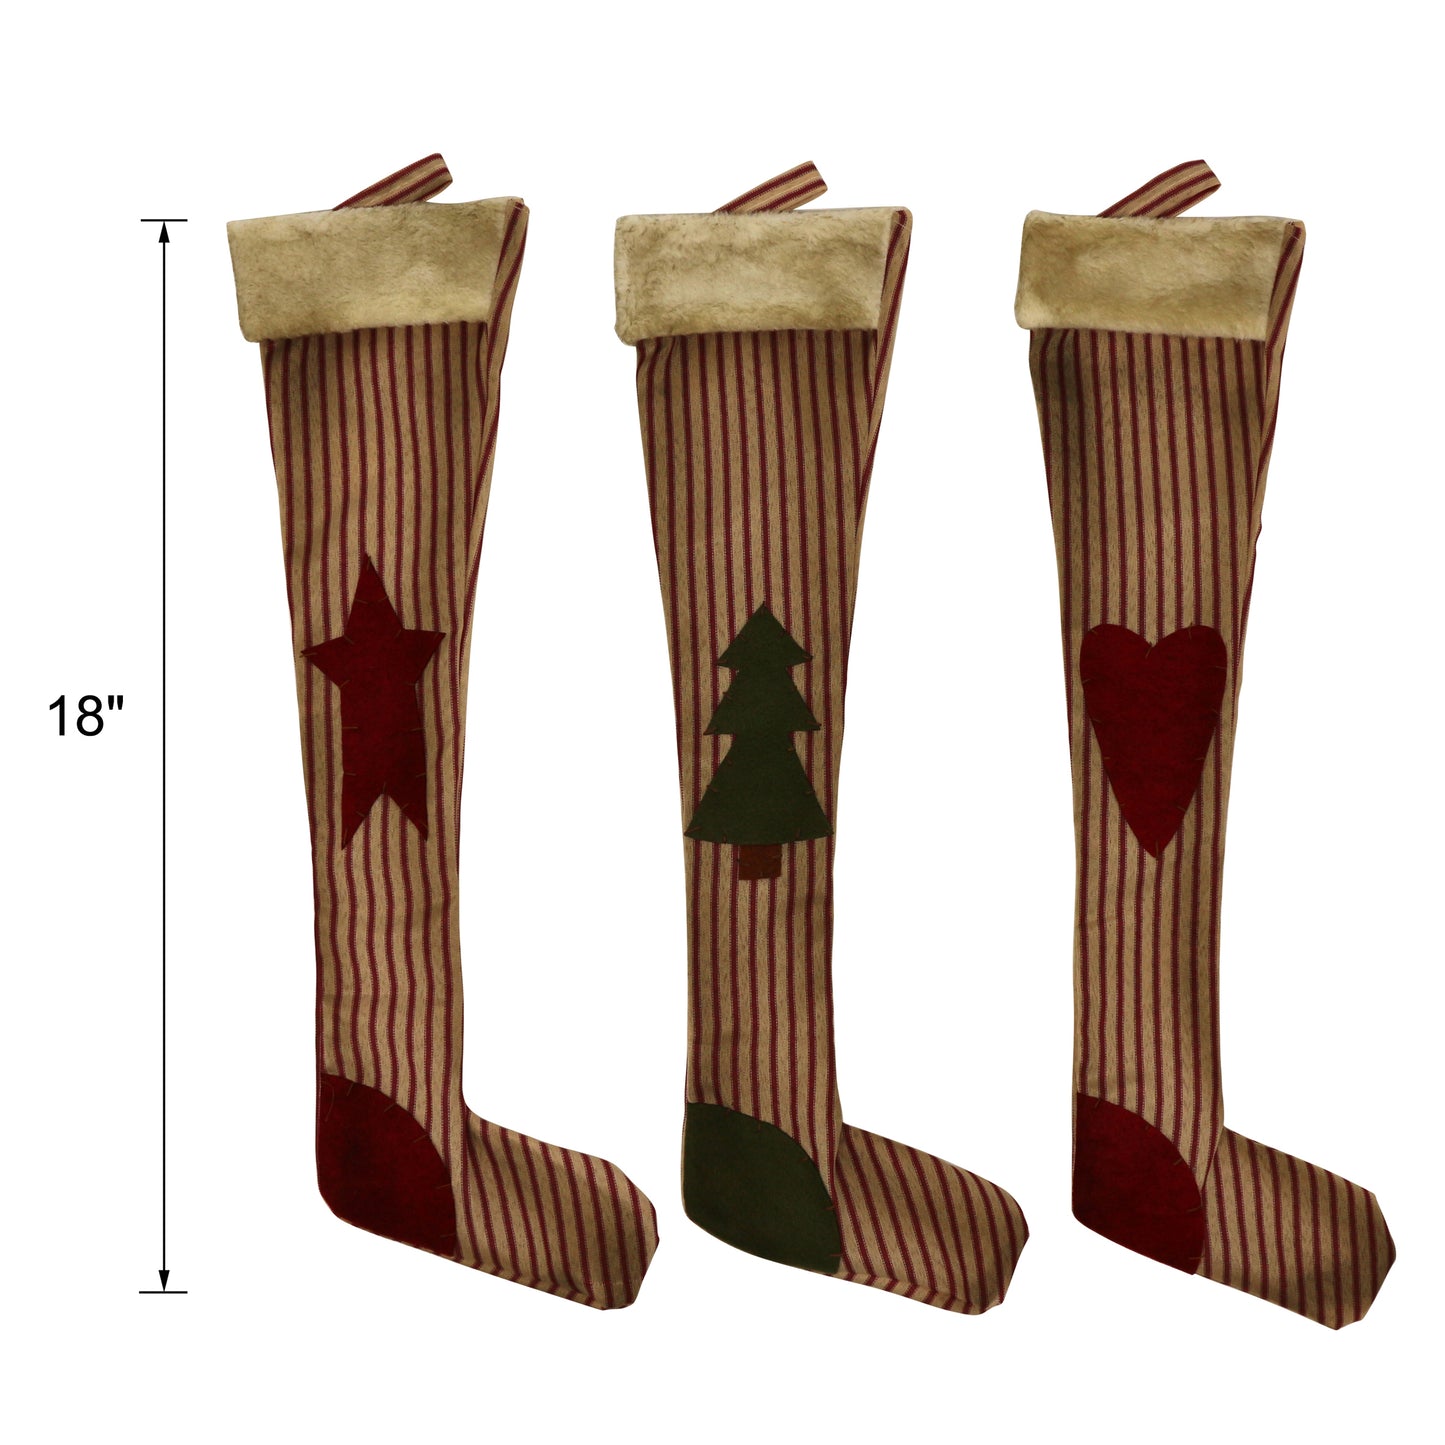 CVHOMEDECO. Primitive Vintage Design 18 Inch Christmas Tree Hanging Stockings Rustic Star, Tree, Heart Xmas Hanging Decoration Gifts, 3 Assorted.